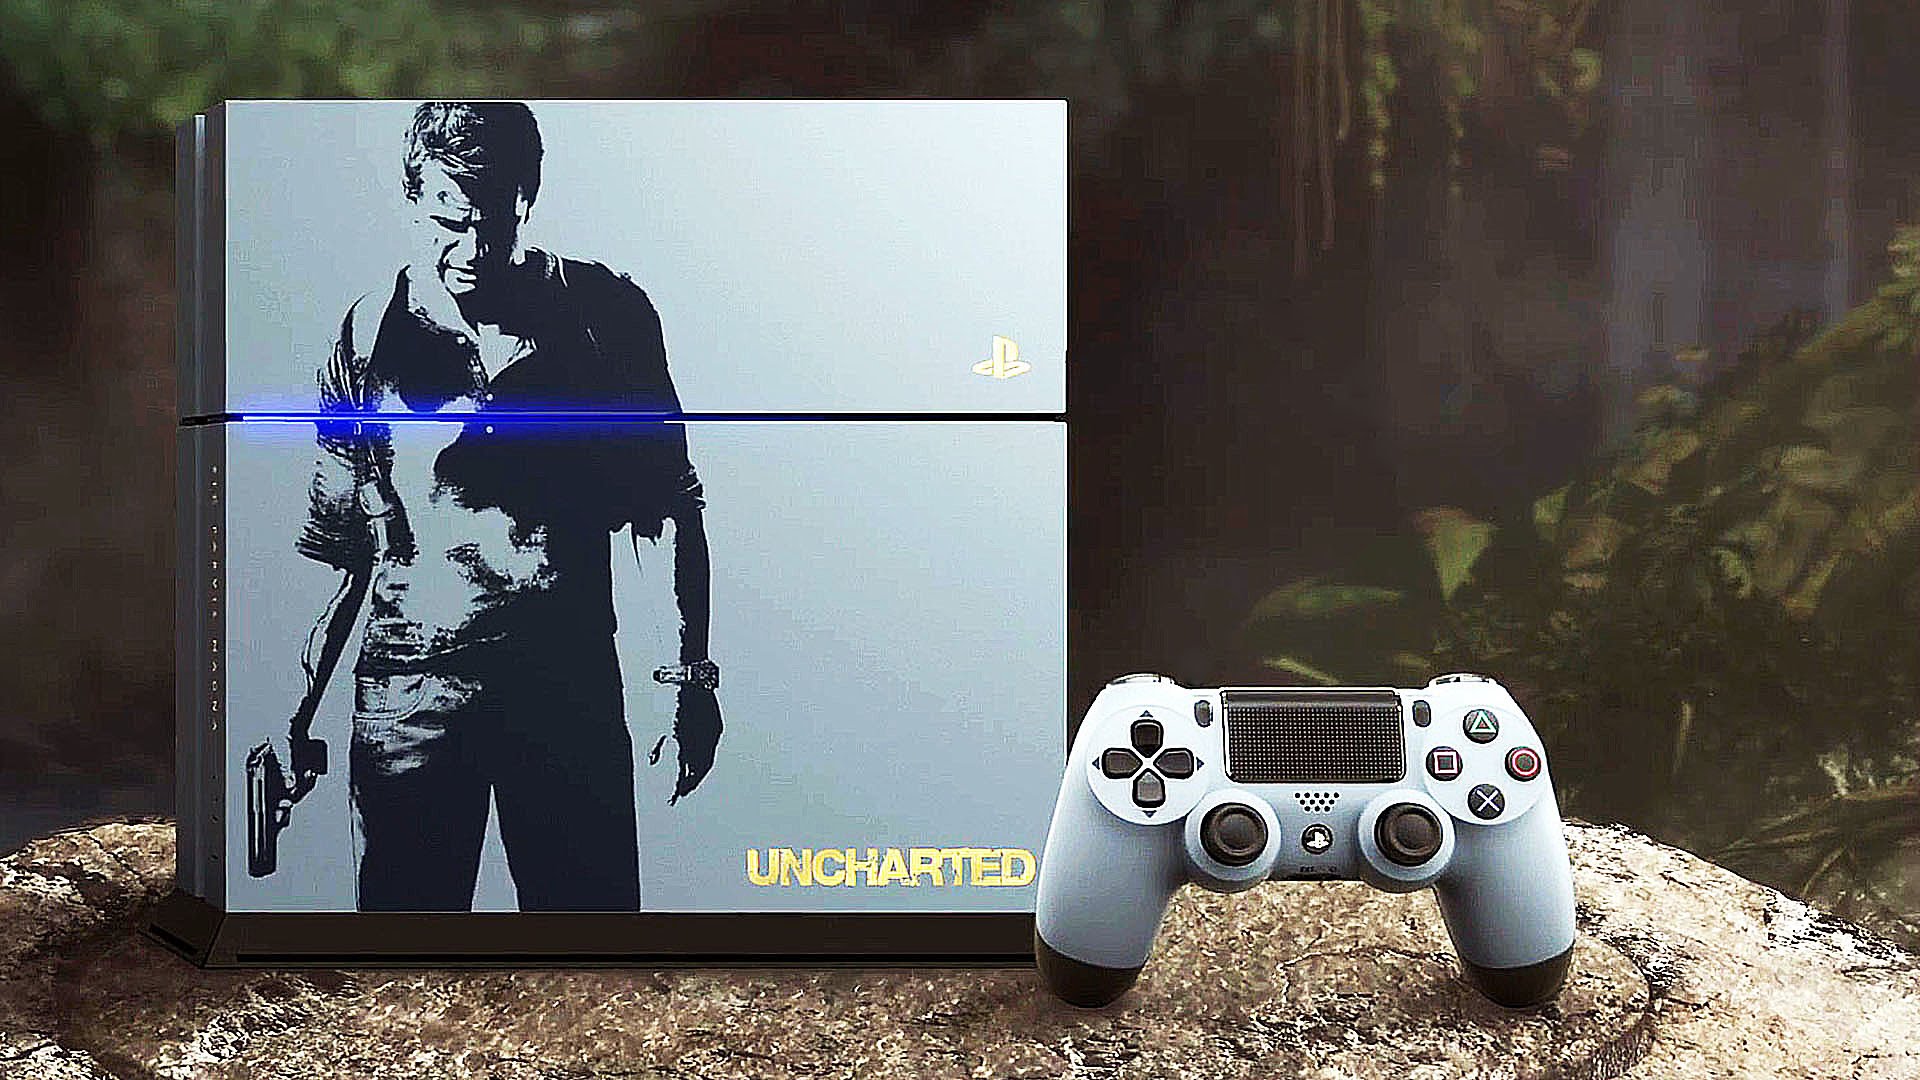 Ps4 скрывать. Ps4 Uncharted 4 Limited. Uncharted PLAYSTATION 4 Limited Edition. Ps4 Uncharted 4 Limited Edition. Sony ps4 Uncharted 4:.